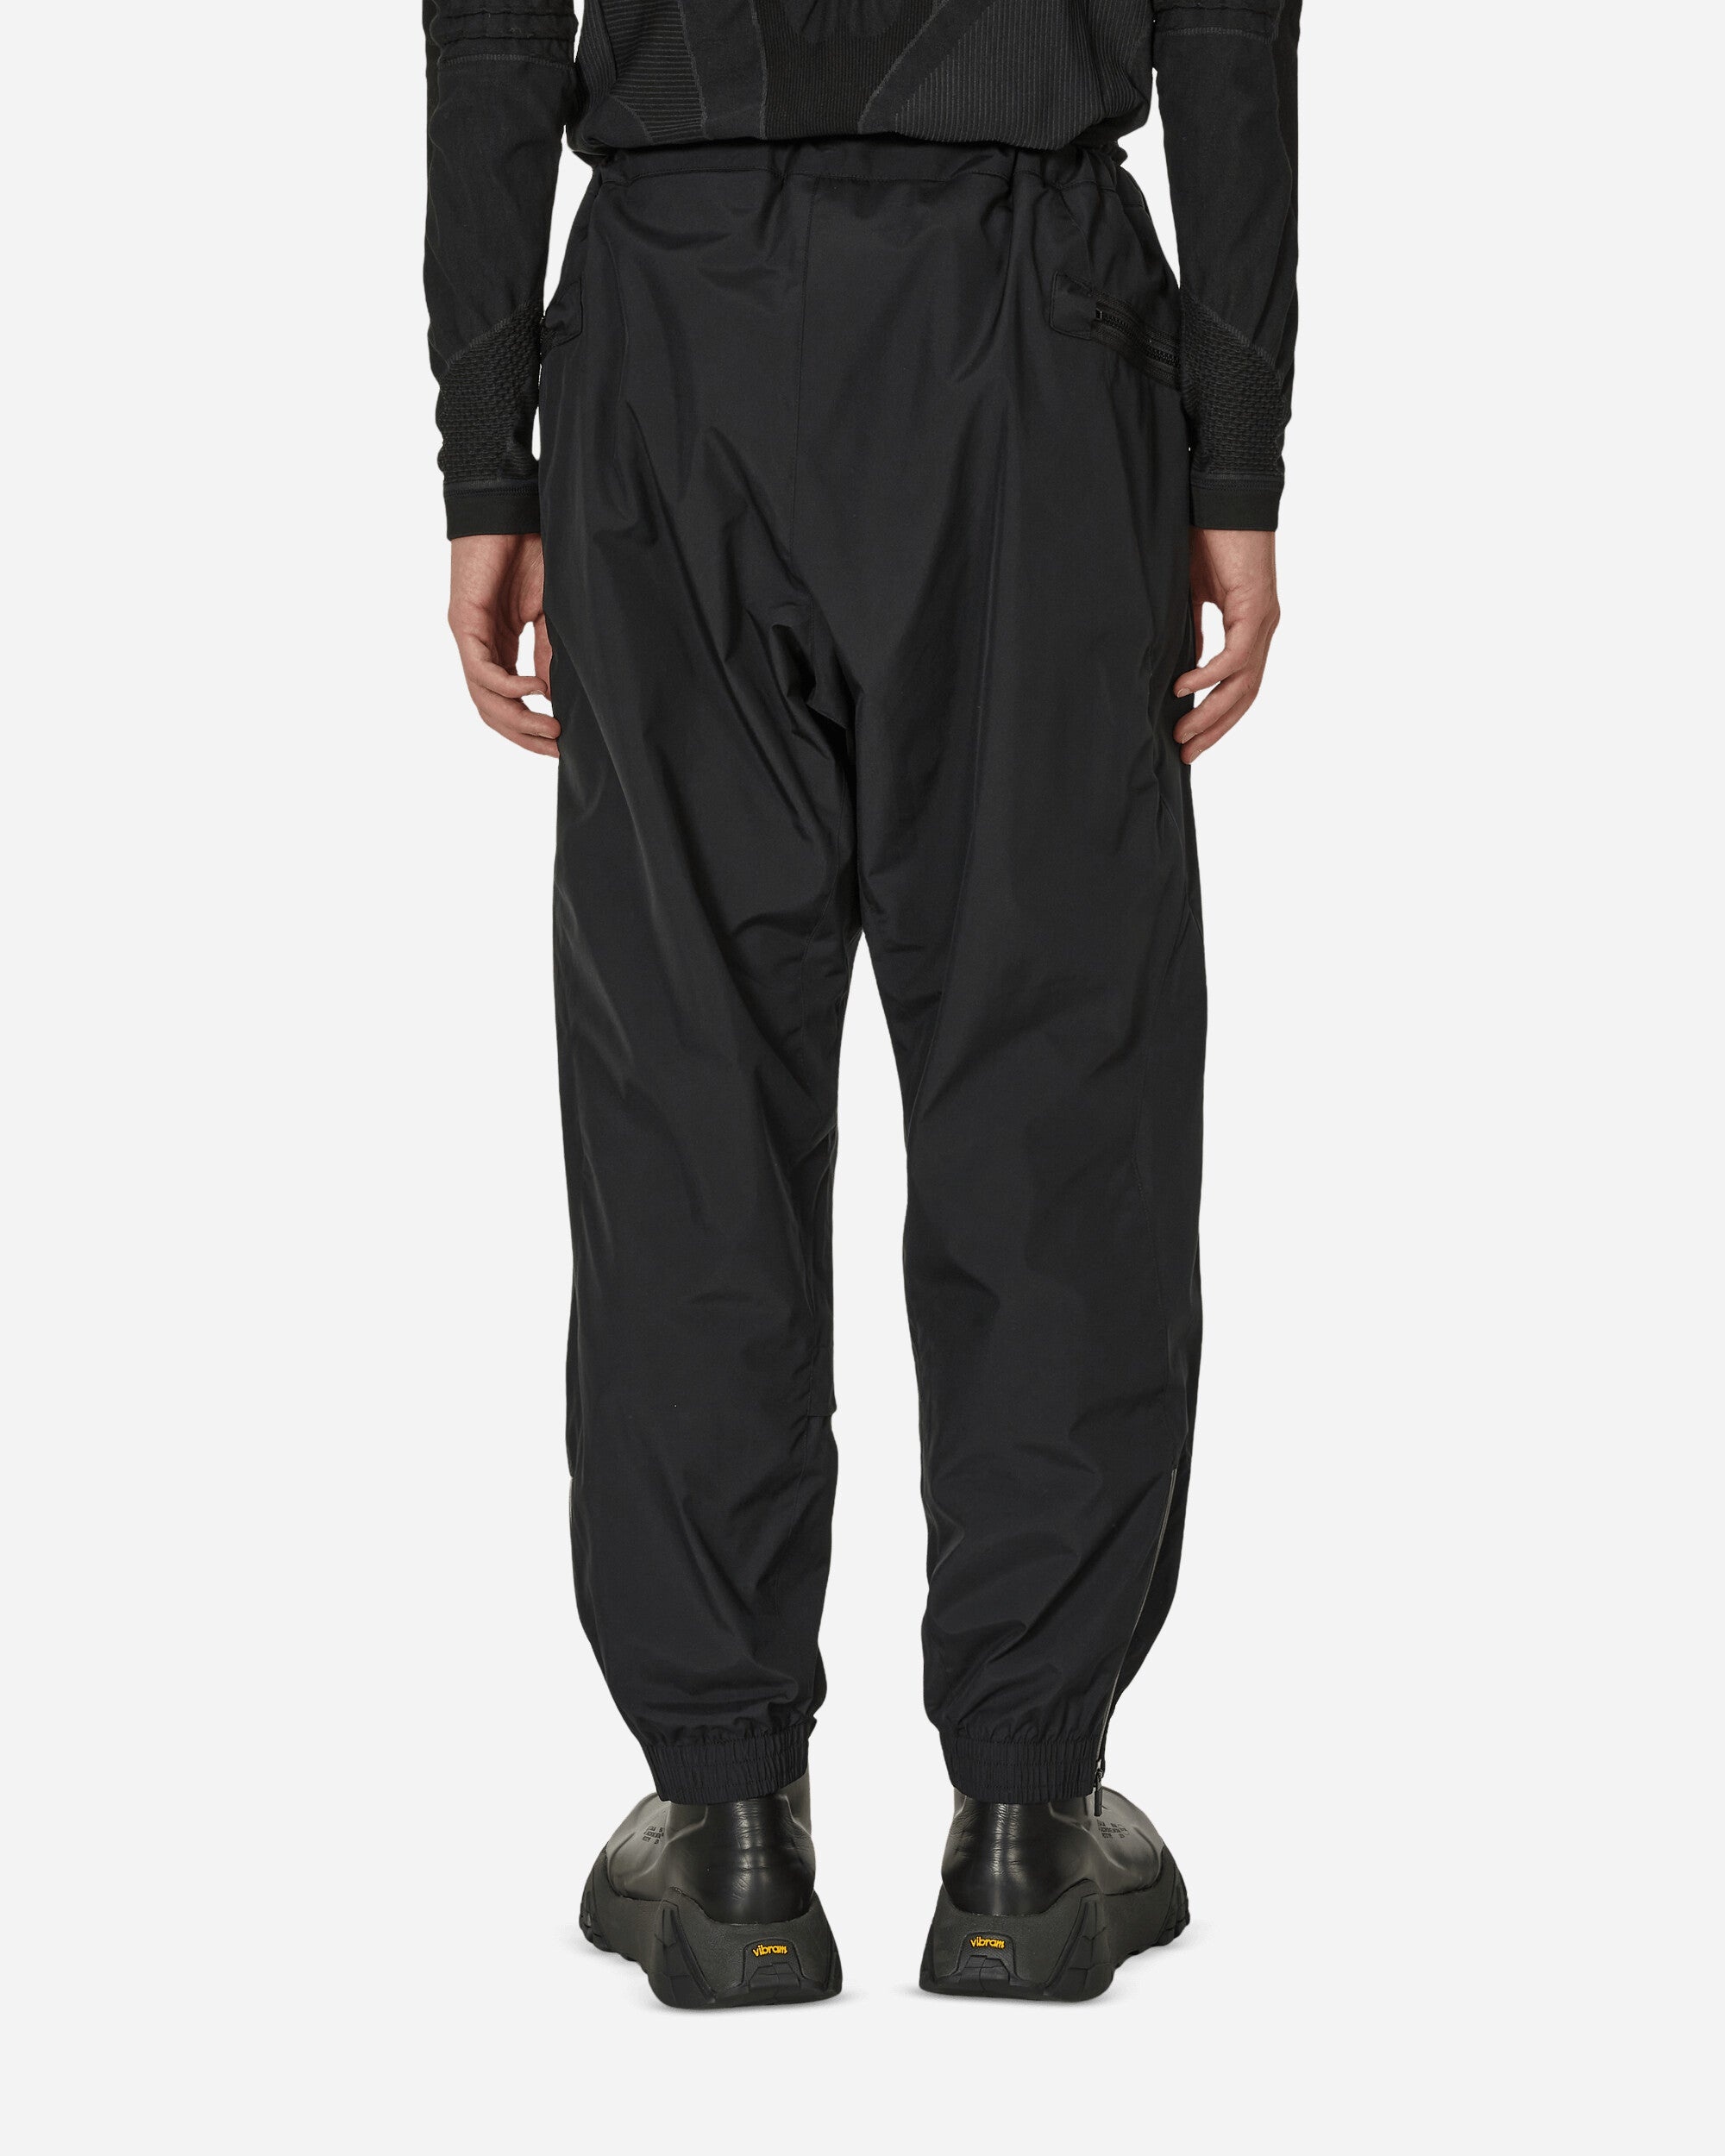 2L GORE-TEX® Windstopper® Insulated Vent Pants - 3